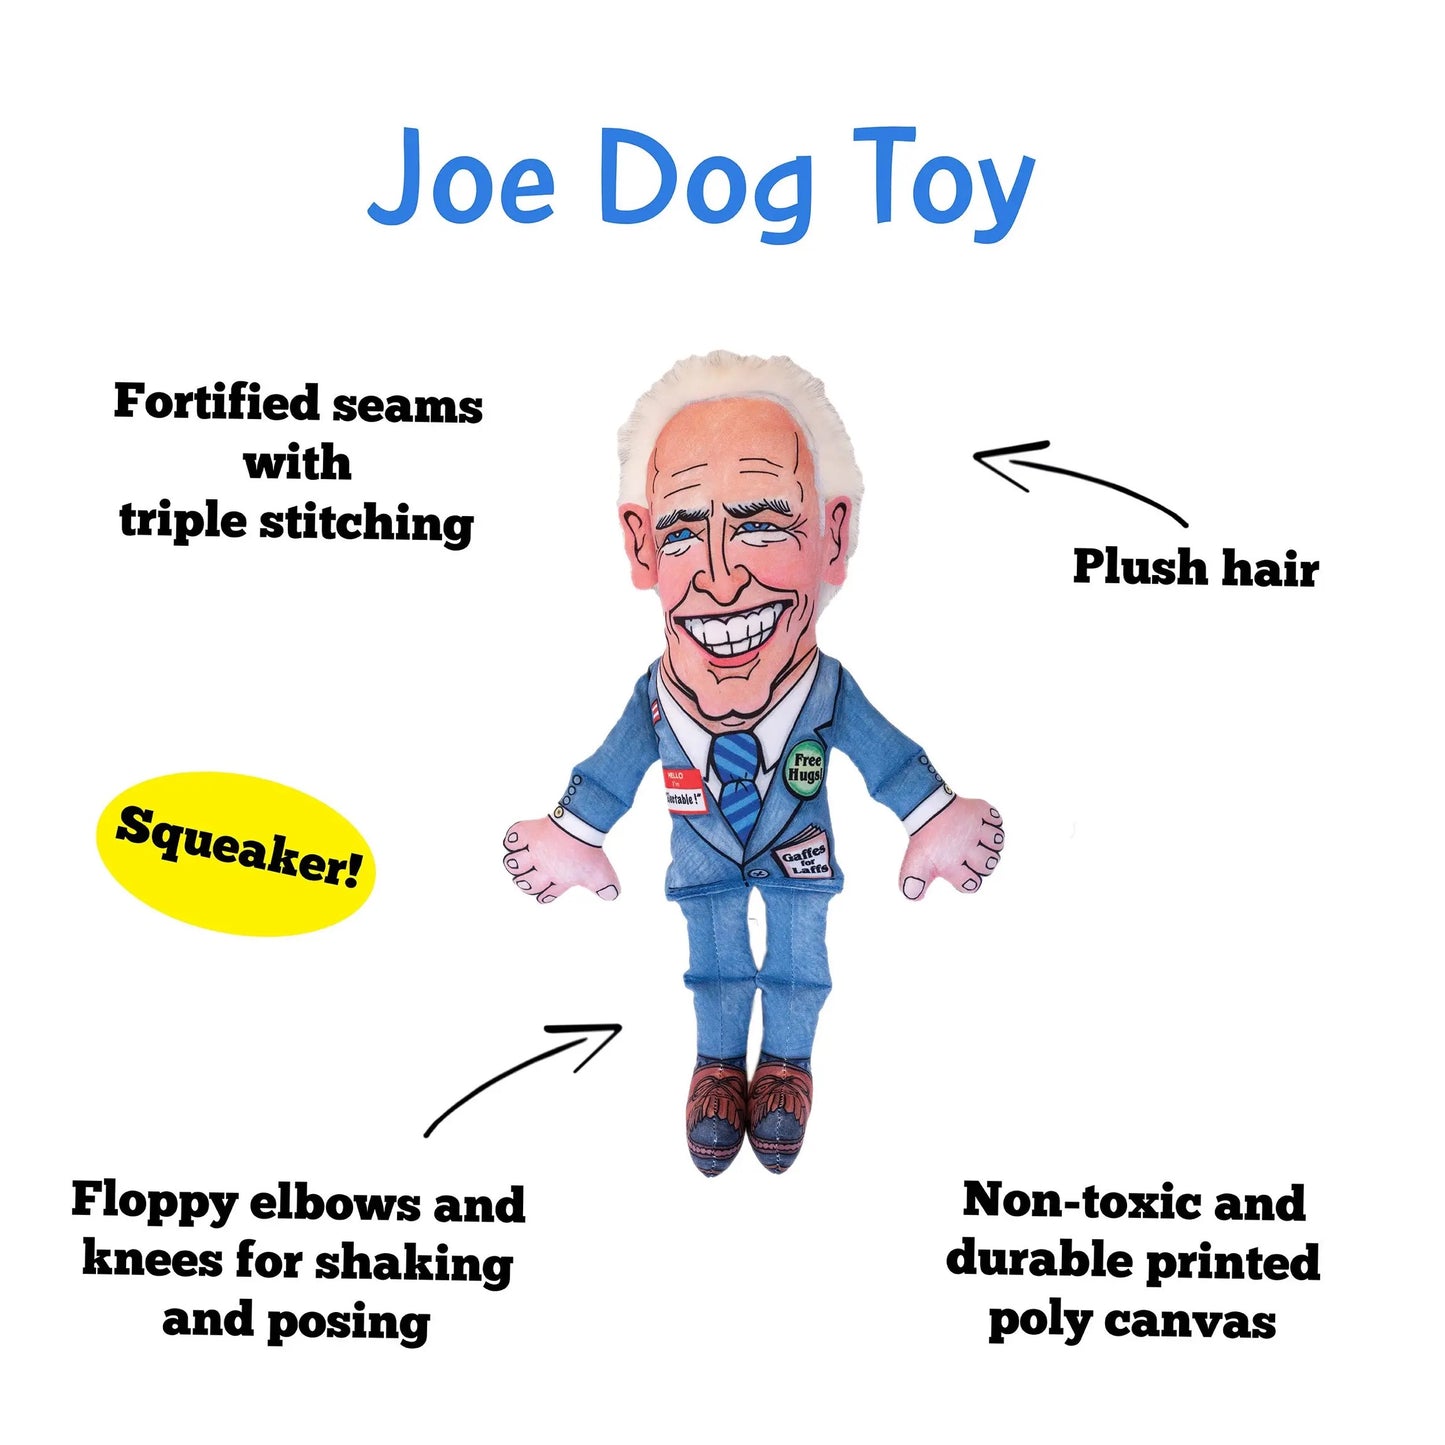 Political Parody Dog Toy - Joe Biden available large or small